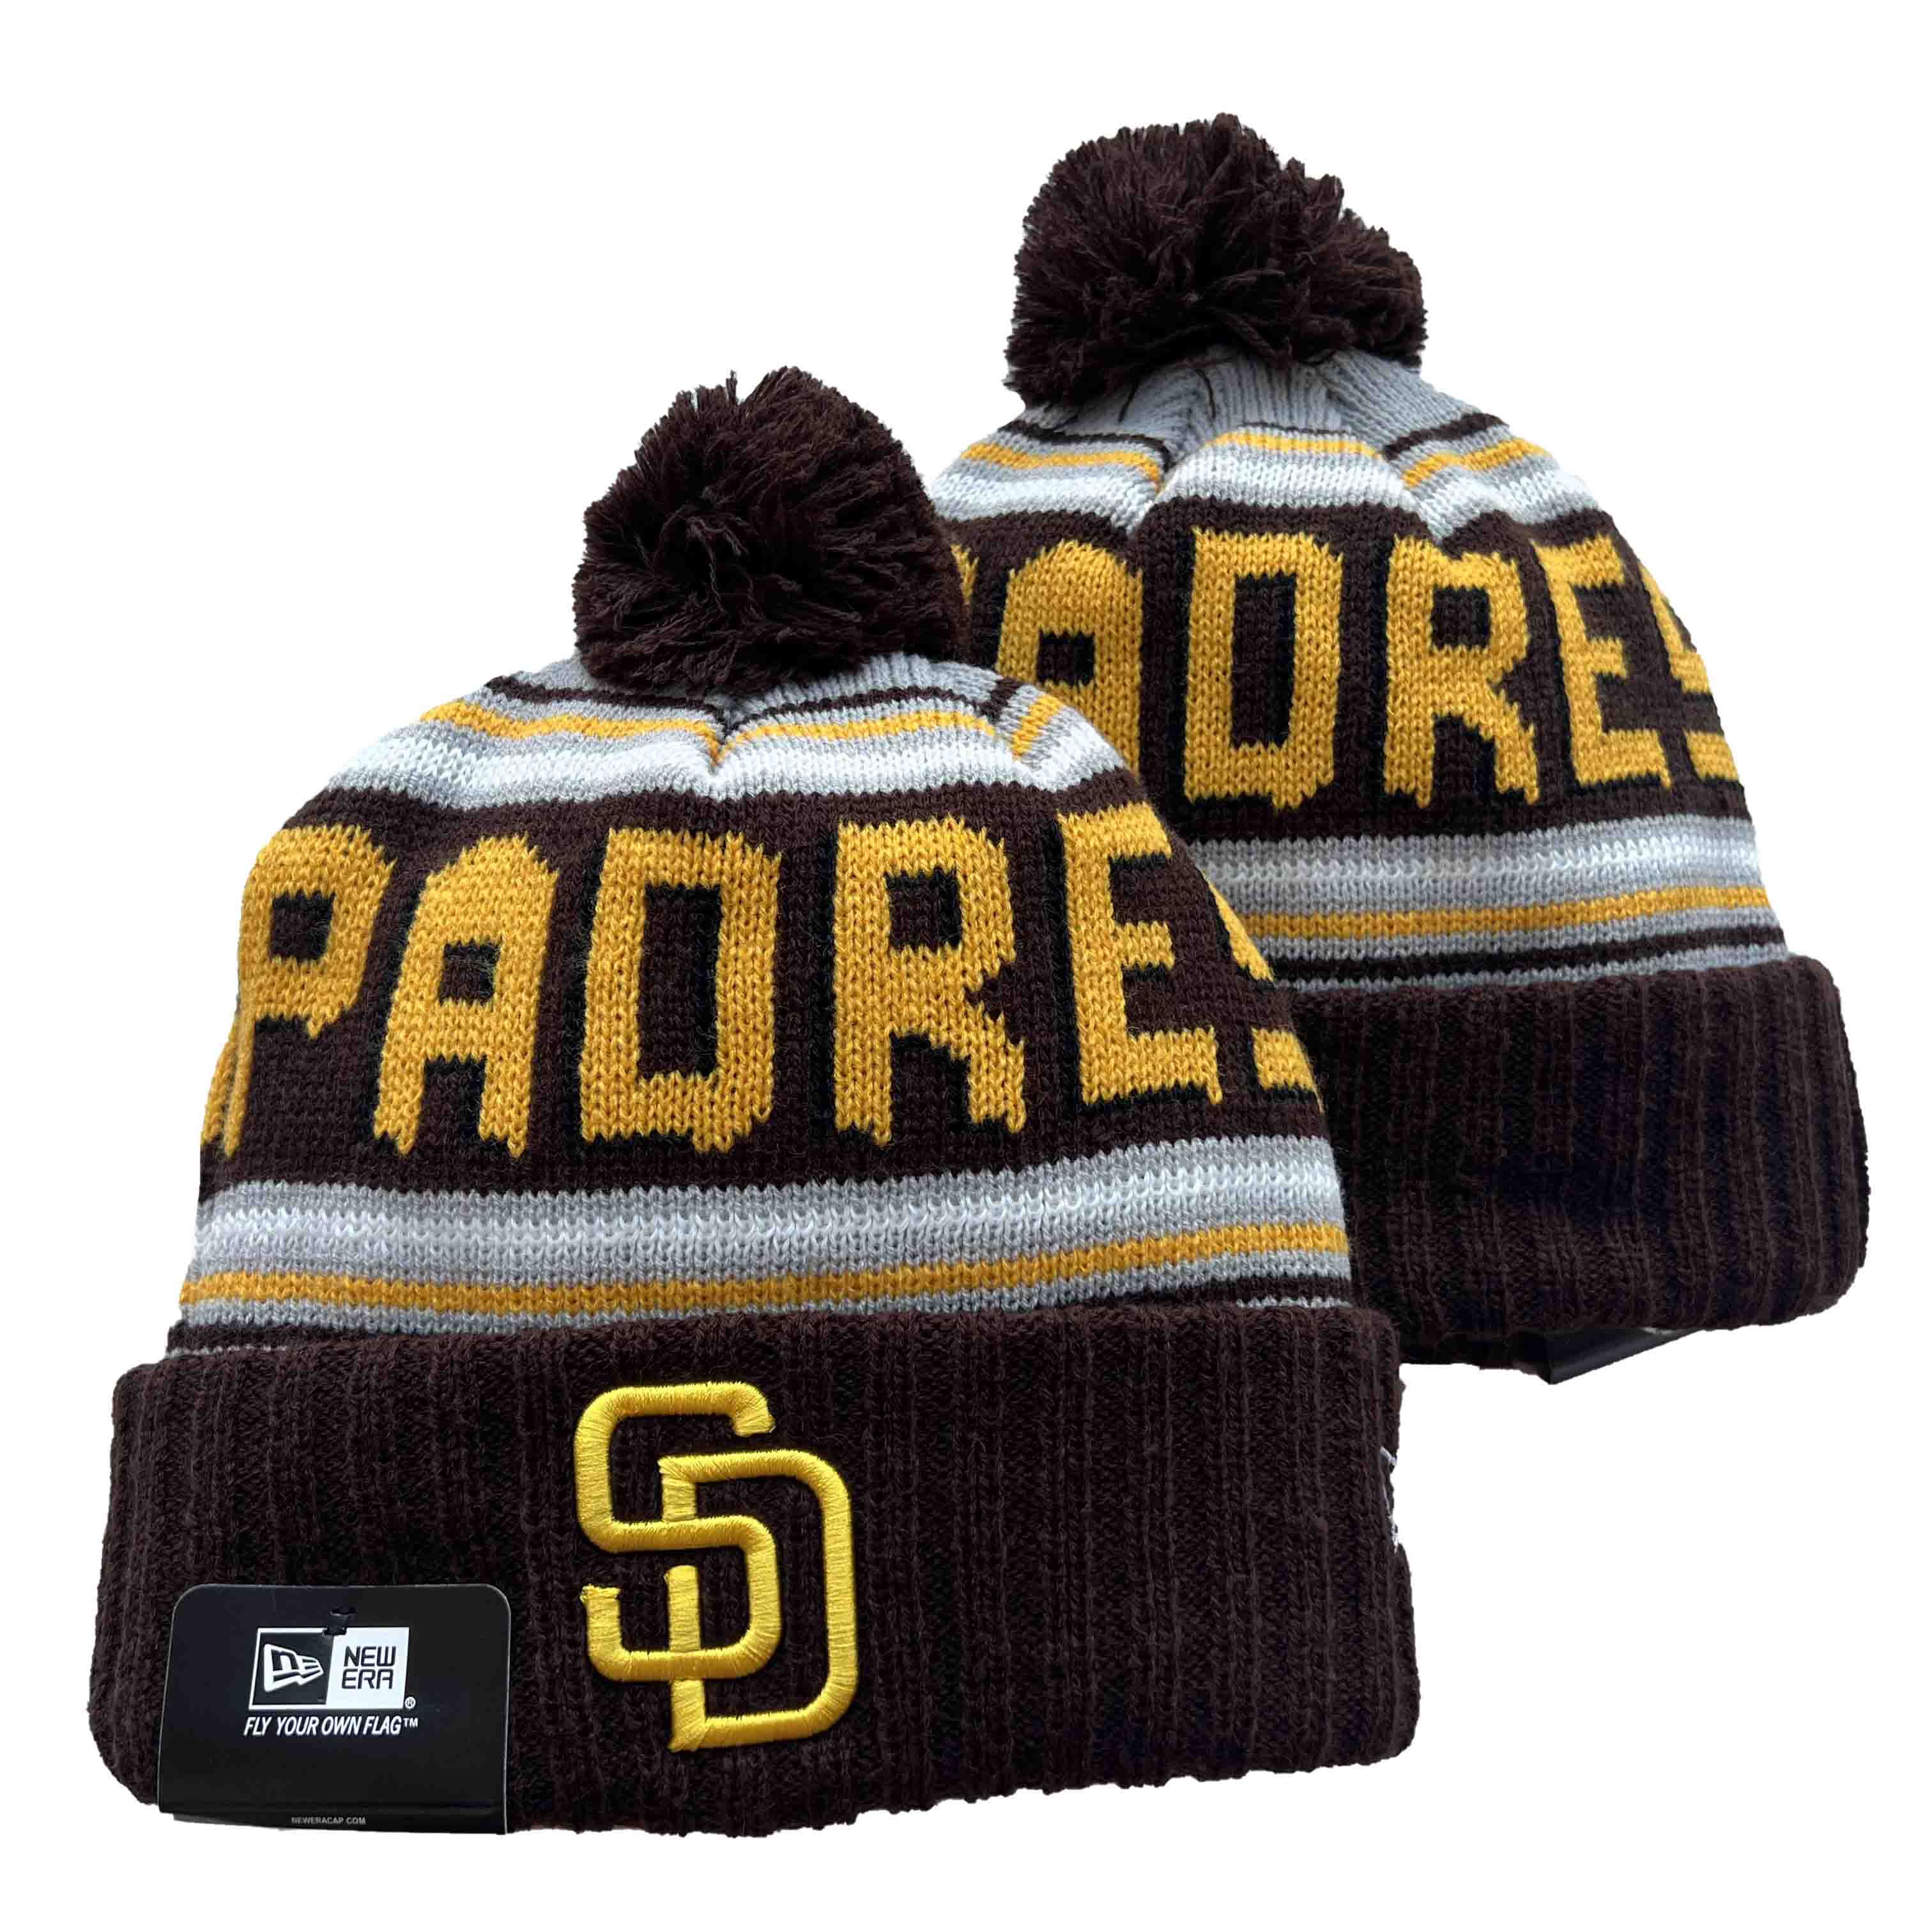 San Diego Padres Knit Hats -2